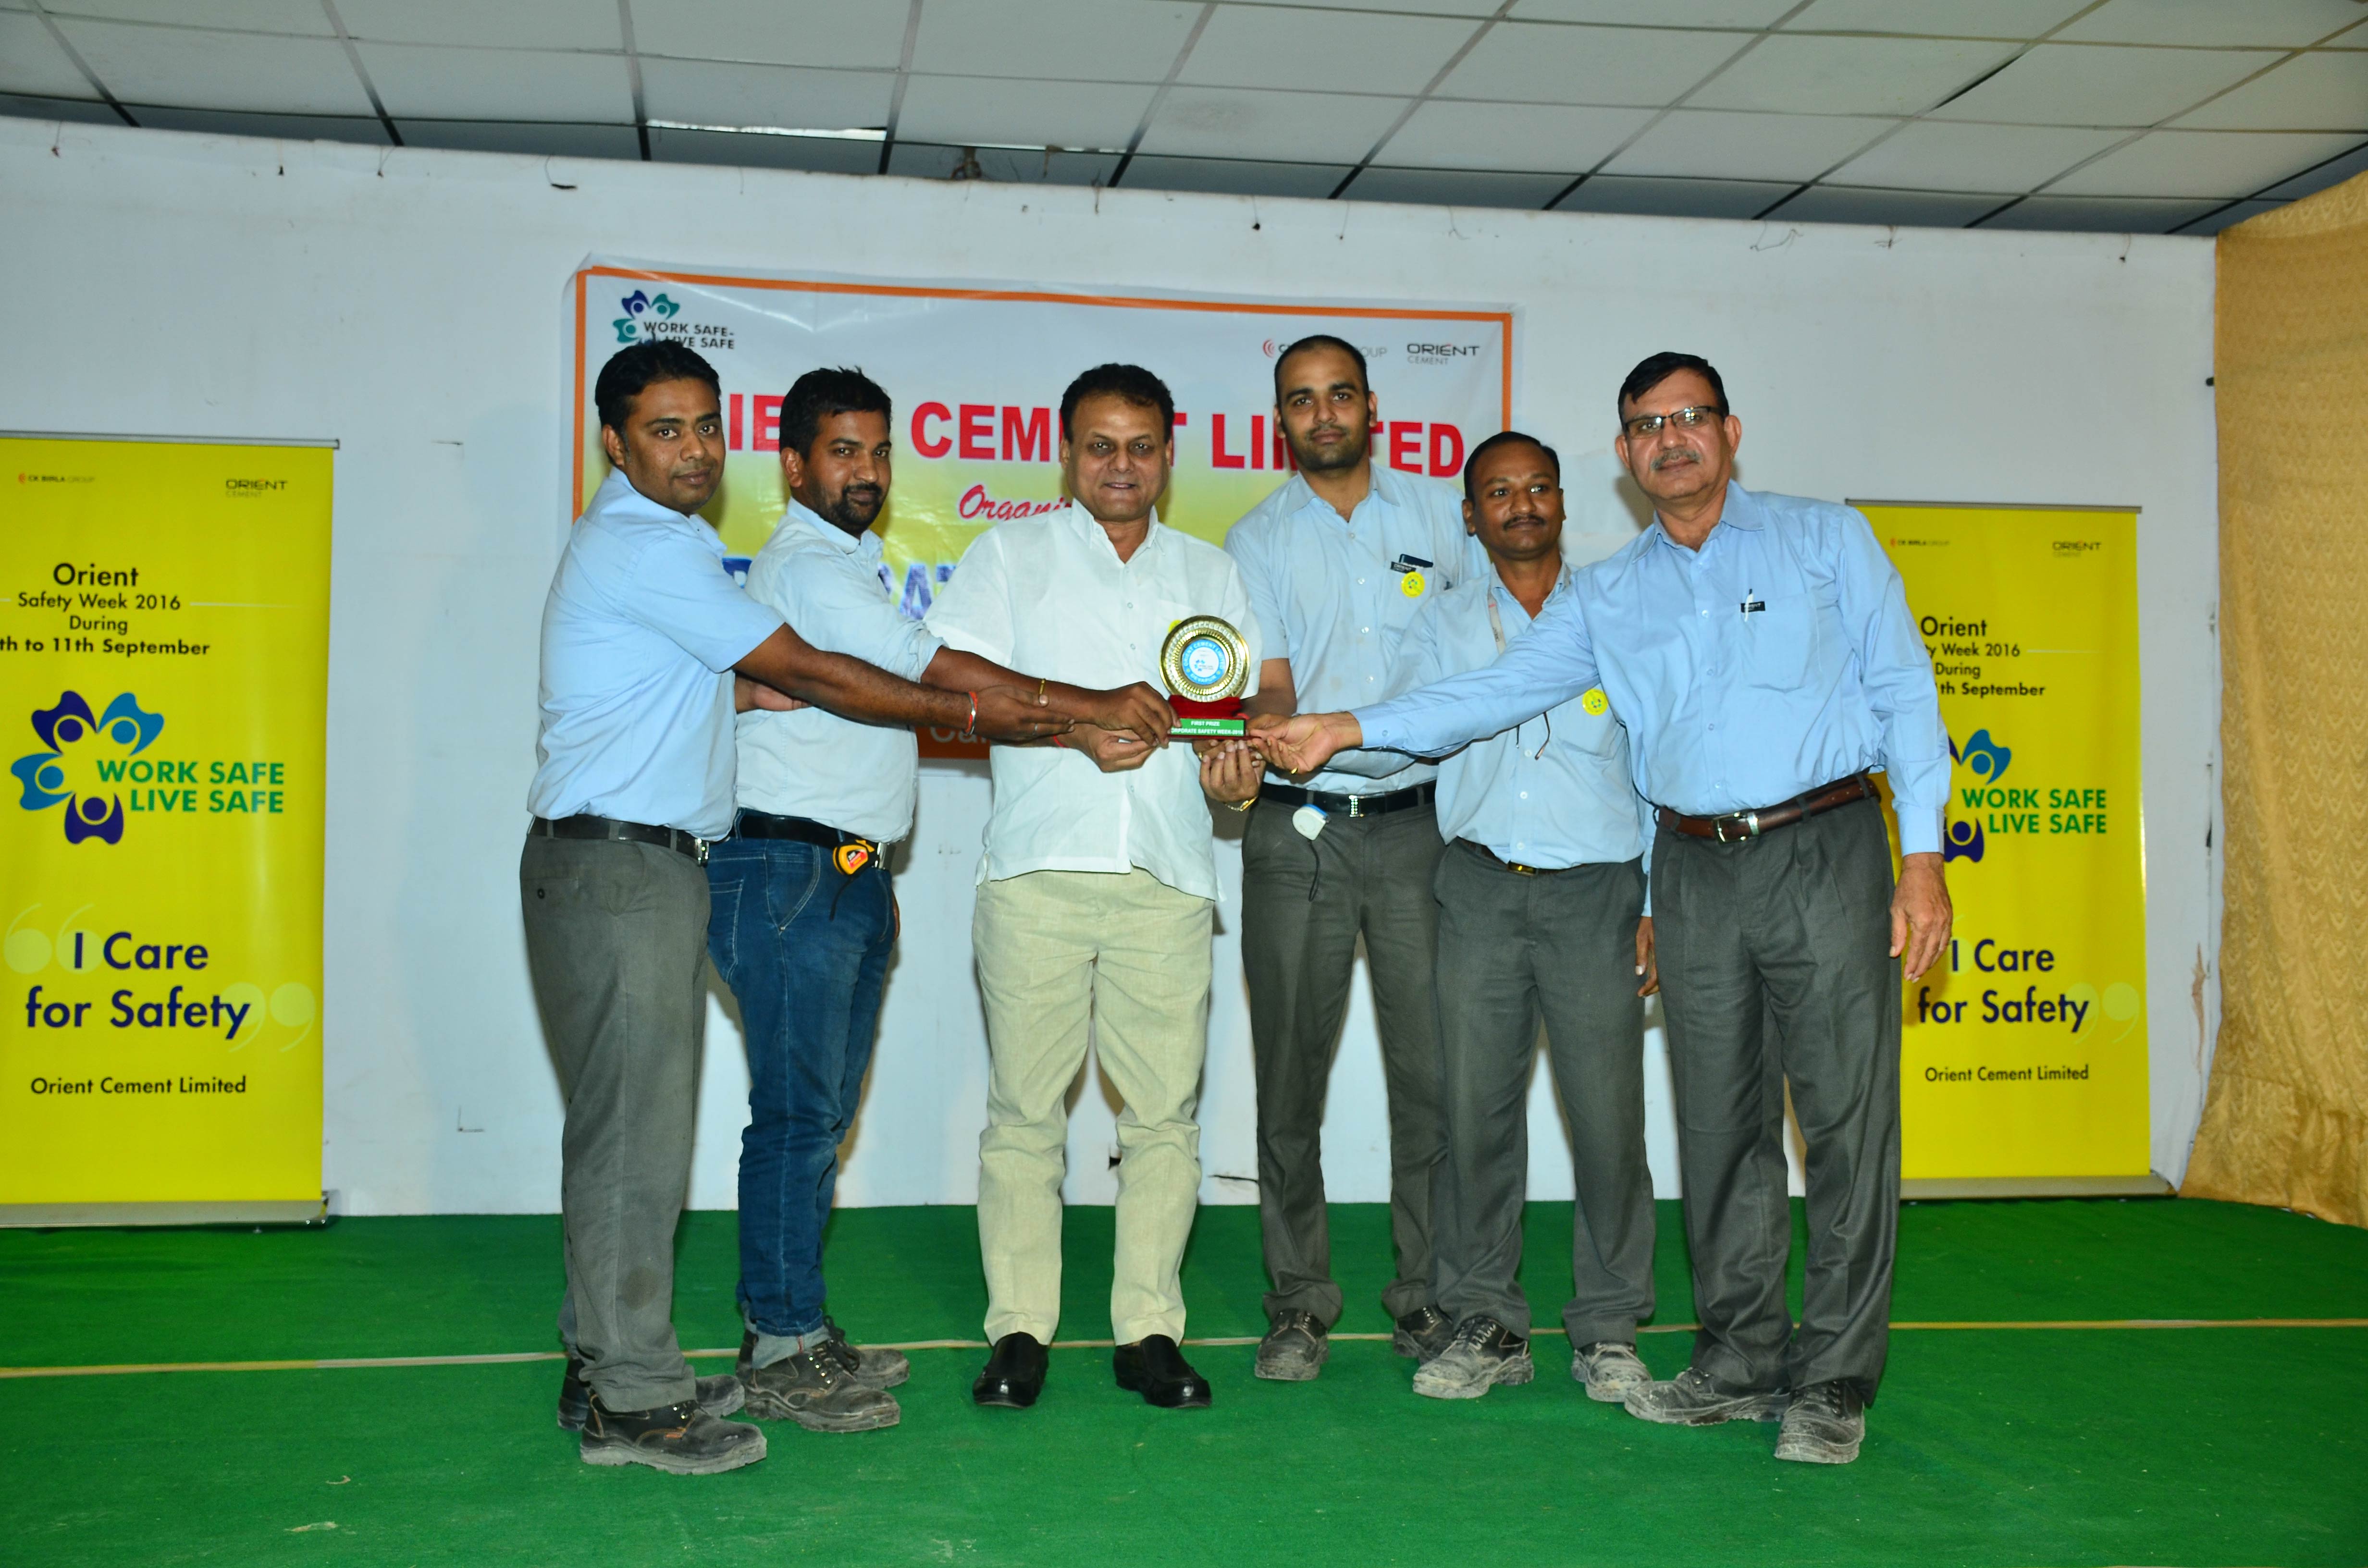 Best House Keeping Trophy at Chittapur